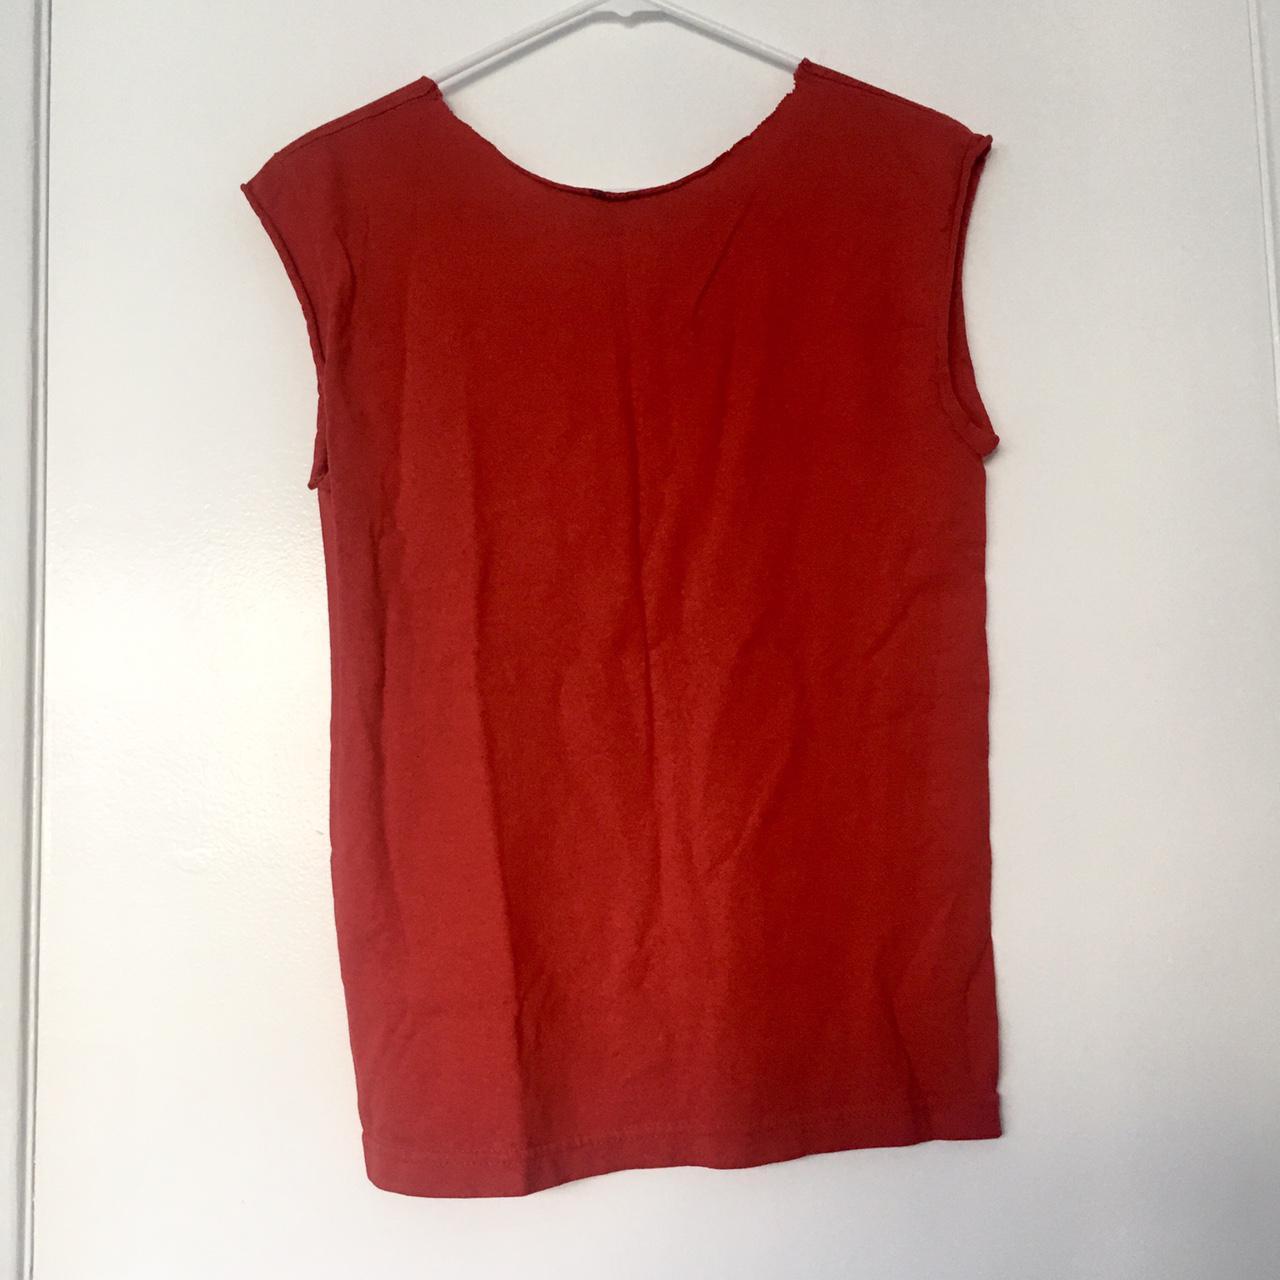 Product Image 2 - Size small t-shirt cut into